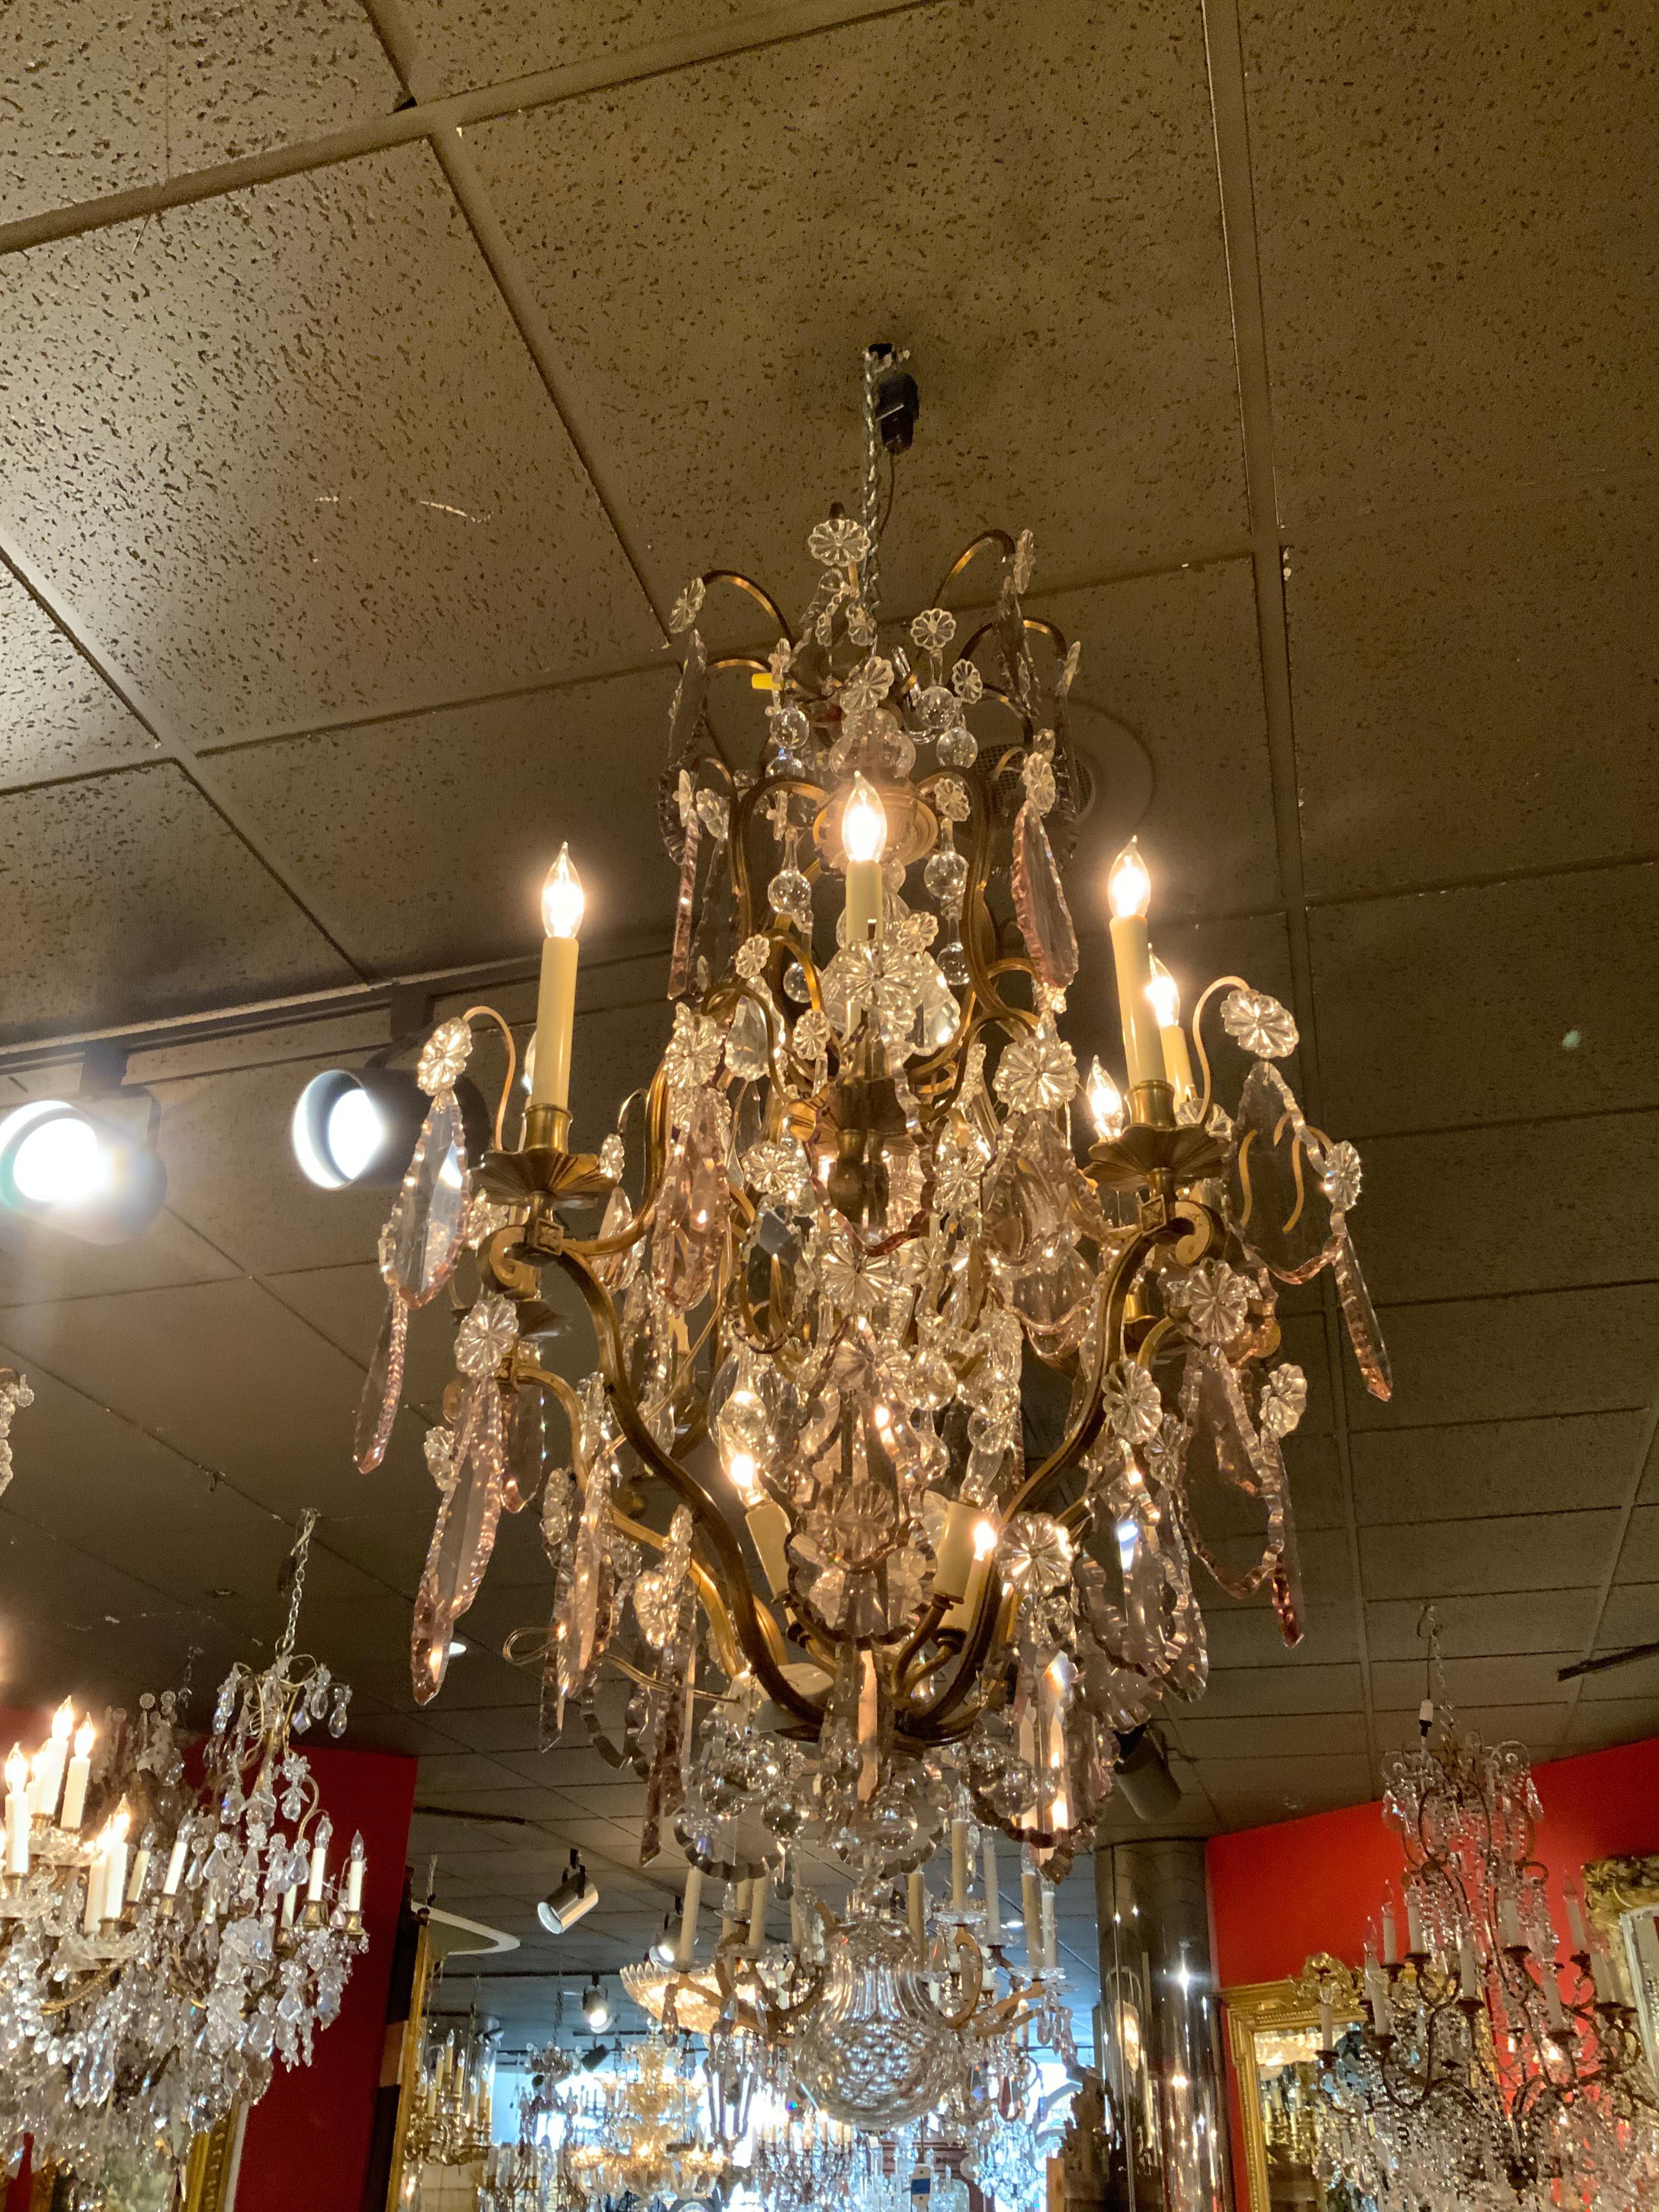 Clear crystal and light lavender crystals make this chandelier exceptional, it has 4 lights 
Inside the cage and 8 lights on the perimeter. The metal work is a soft patina of gilt gold.